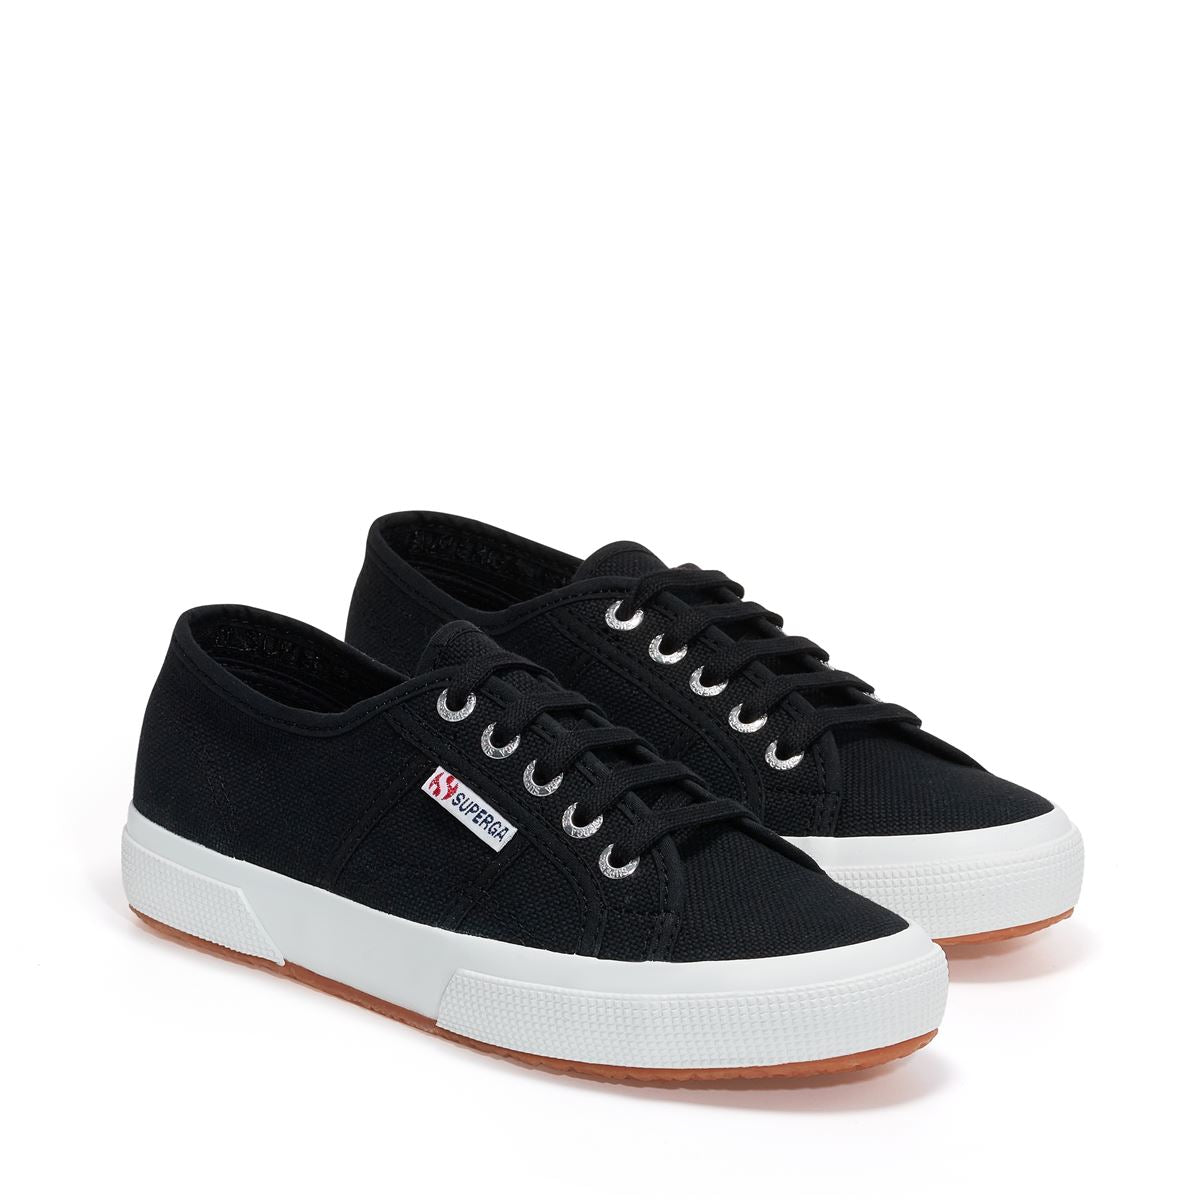 2750 Cotu Classic Sneakers Black- Hover Image